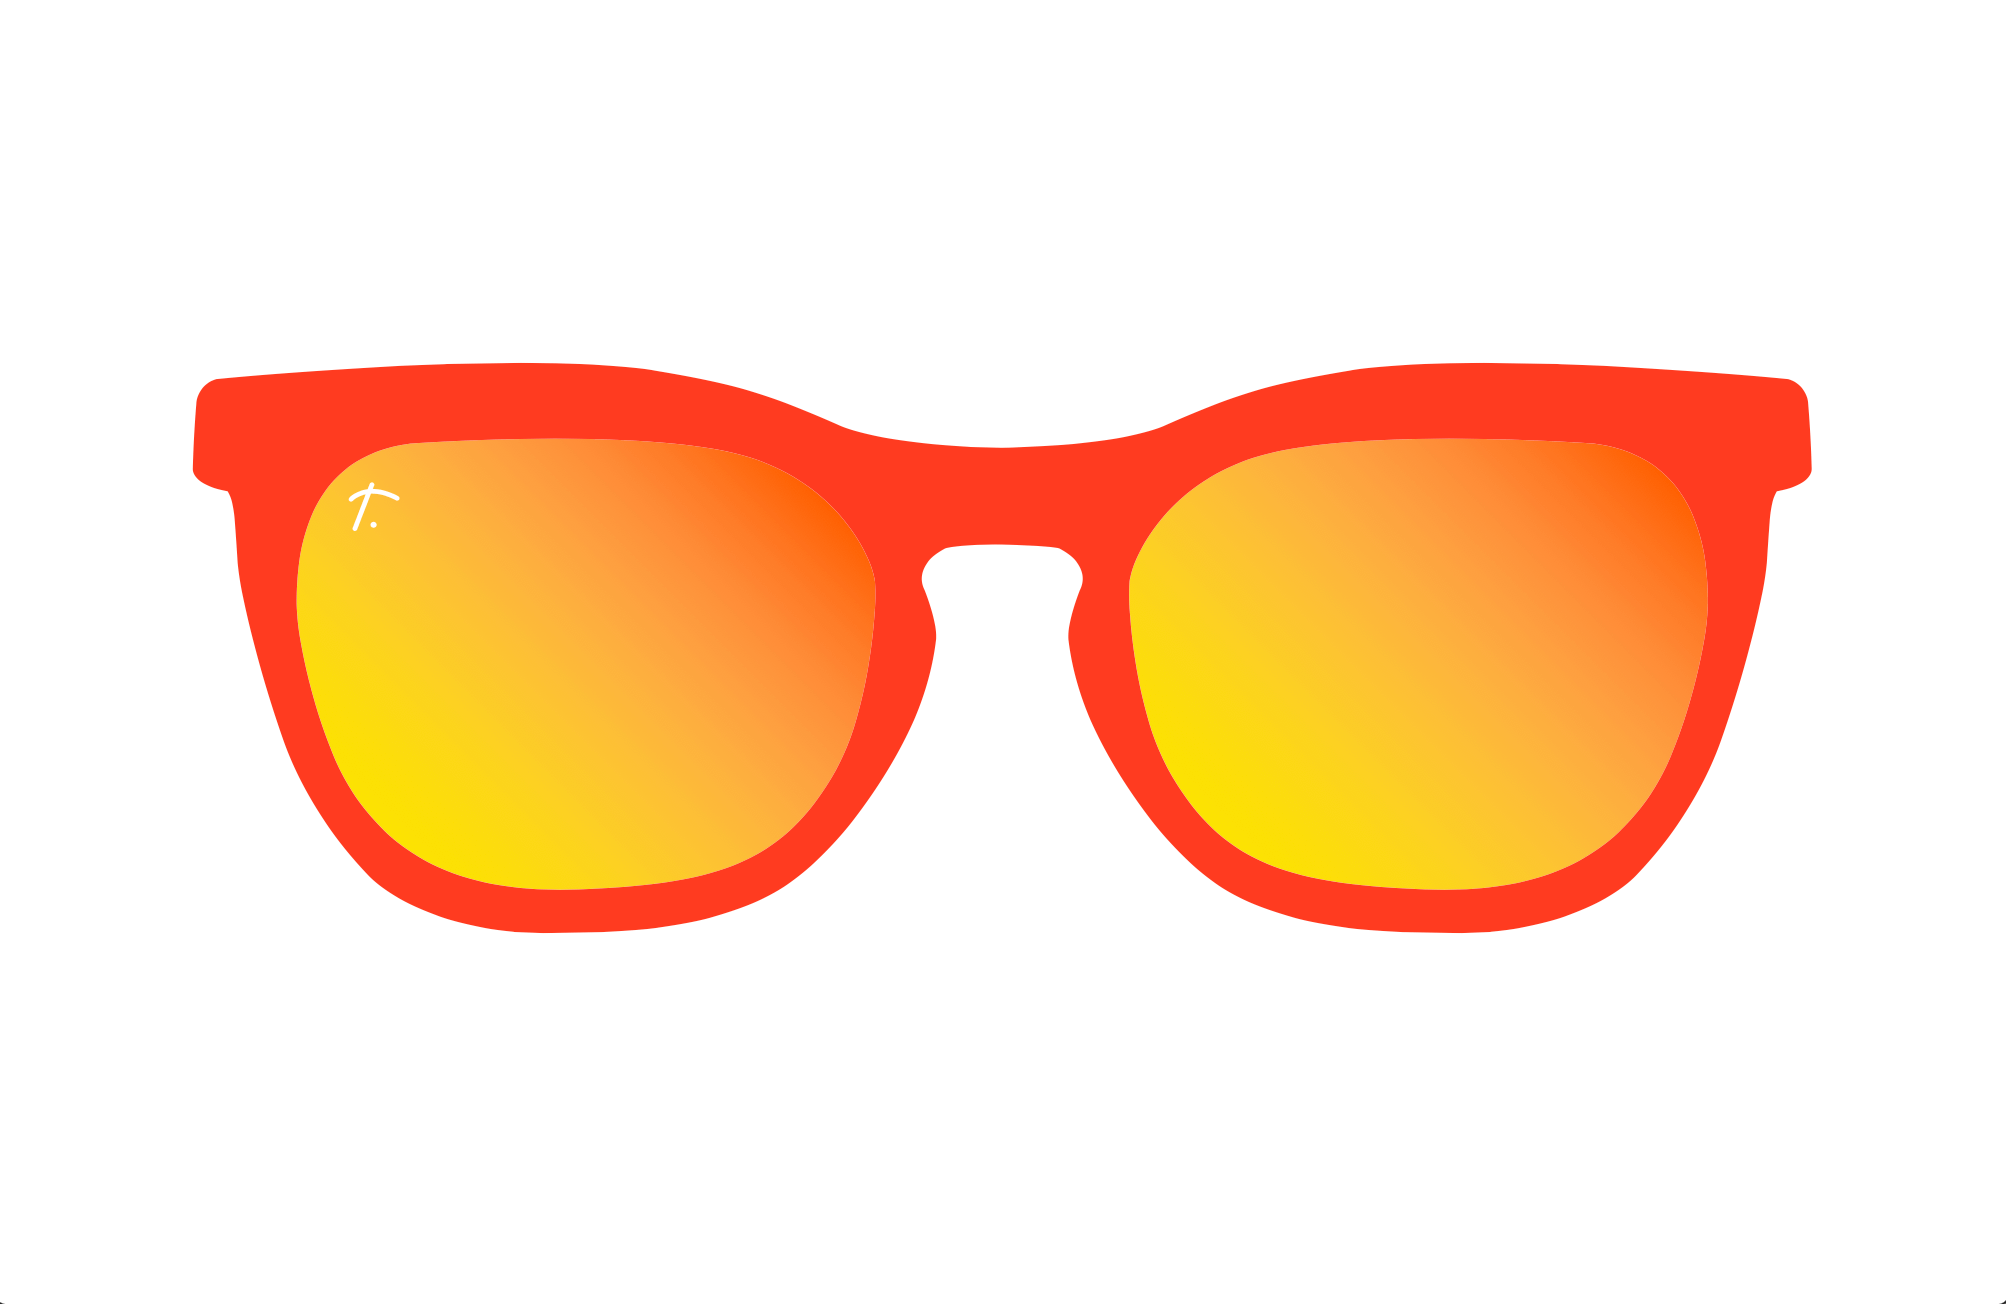 Are Ray-Ban Sunglasses Good For Running